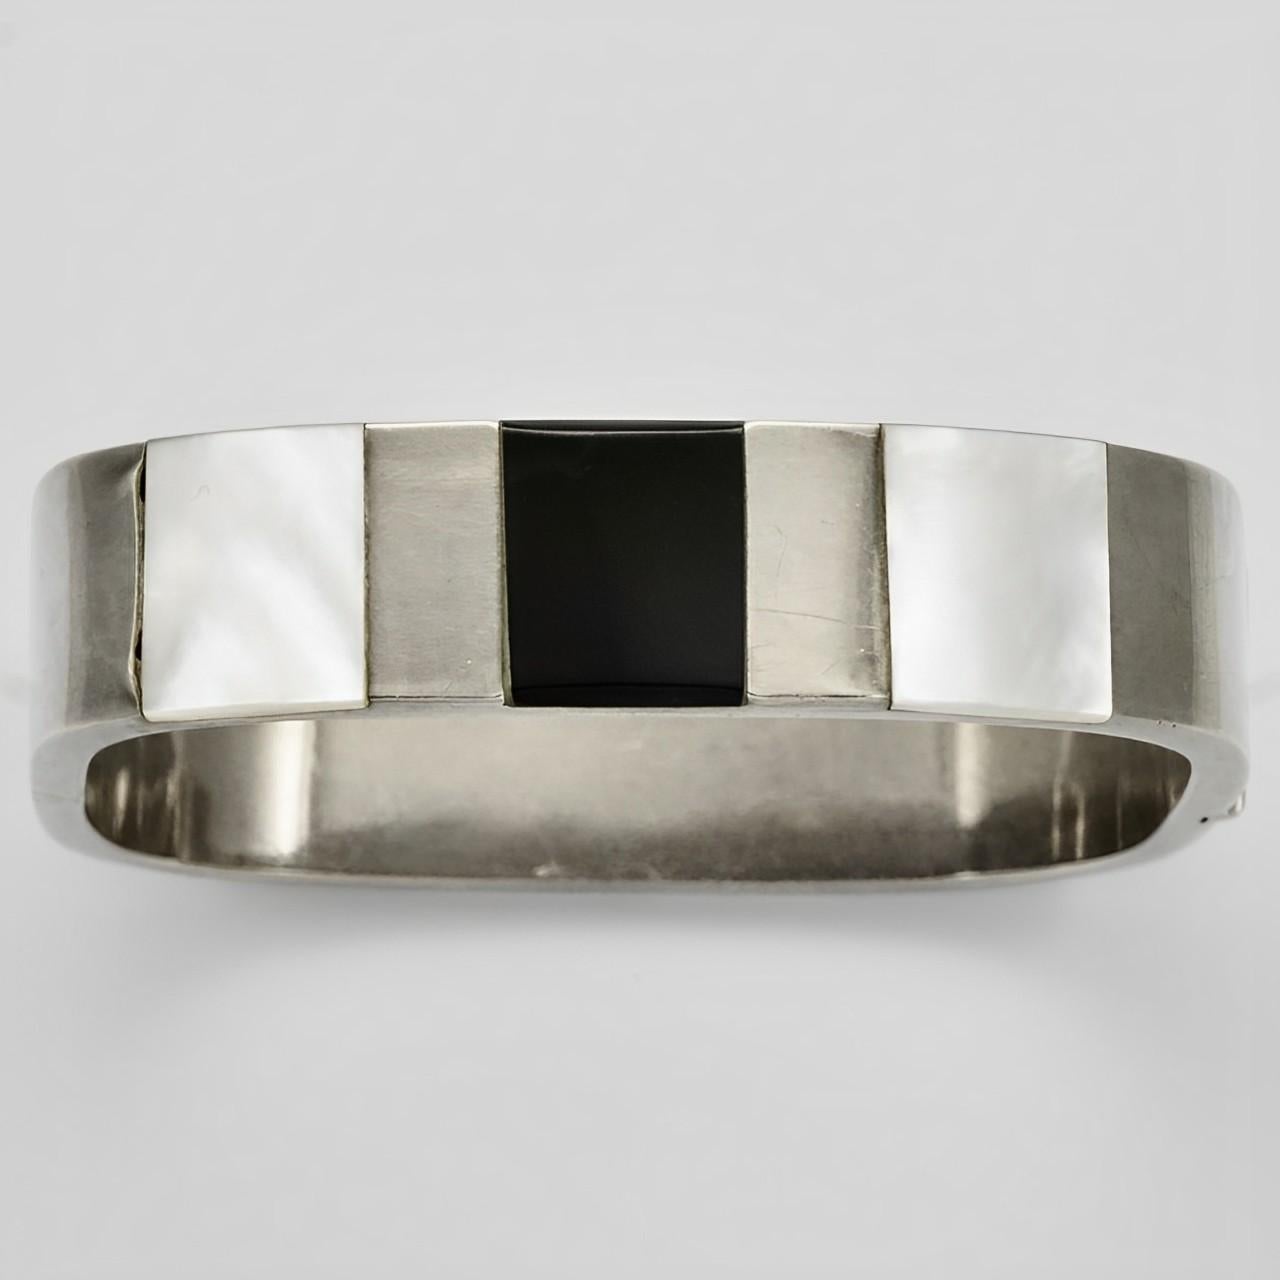 Wonderful sterling silver bangle bracelet, set with mother of pearl and onyx. It is rectangular, the inside measurements are 5.8 cm / 2.2 inches by 5.4 cm / 2.1 inches, and the width is 1.45 / .5 inch. There is scratching as expected, and two small